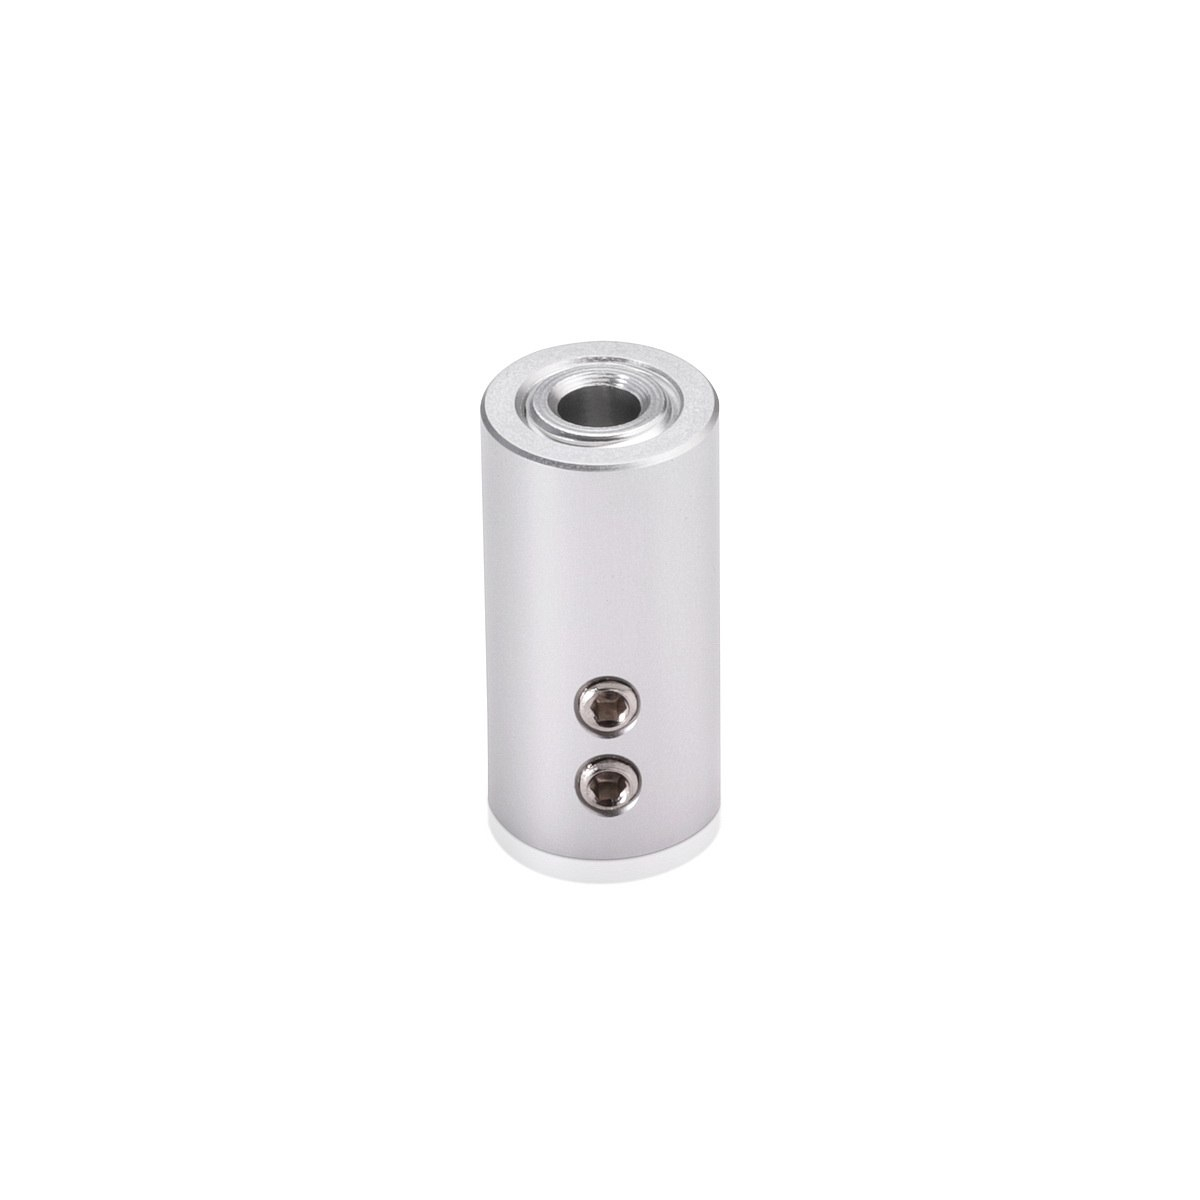 Aluminum Ceiling Mounted Material Holder, Clear Anodized Finish